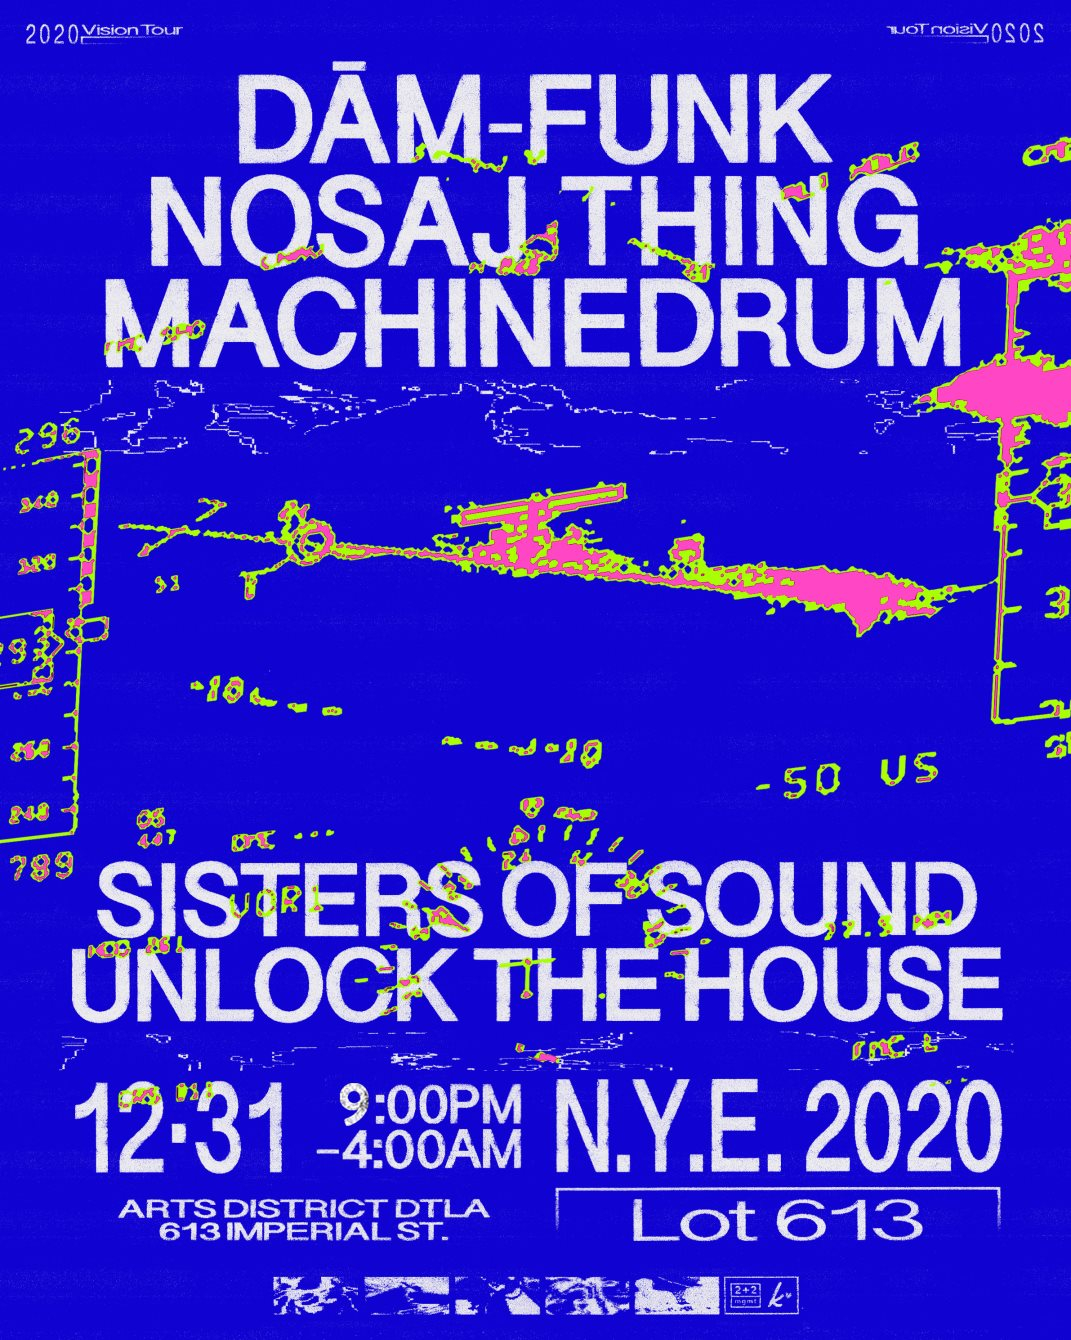 2020 Vision NYE with DâM-Funk, Nosaj Thing, Machinedrum - Flyer back